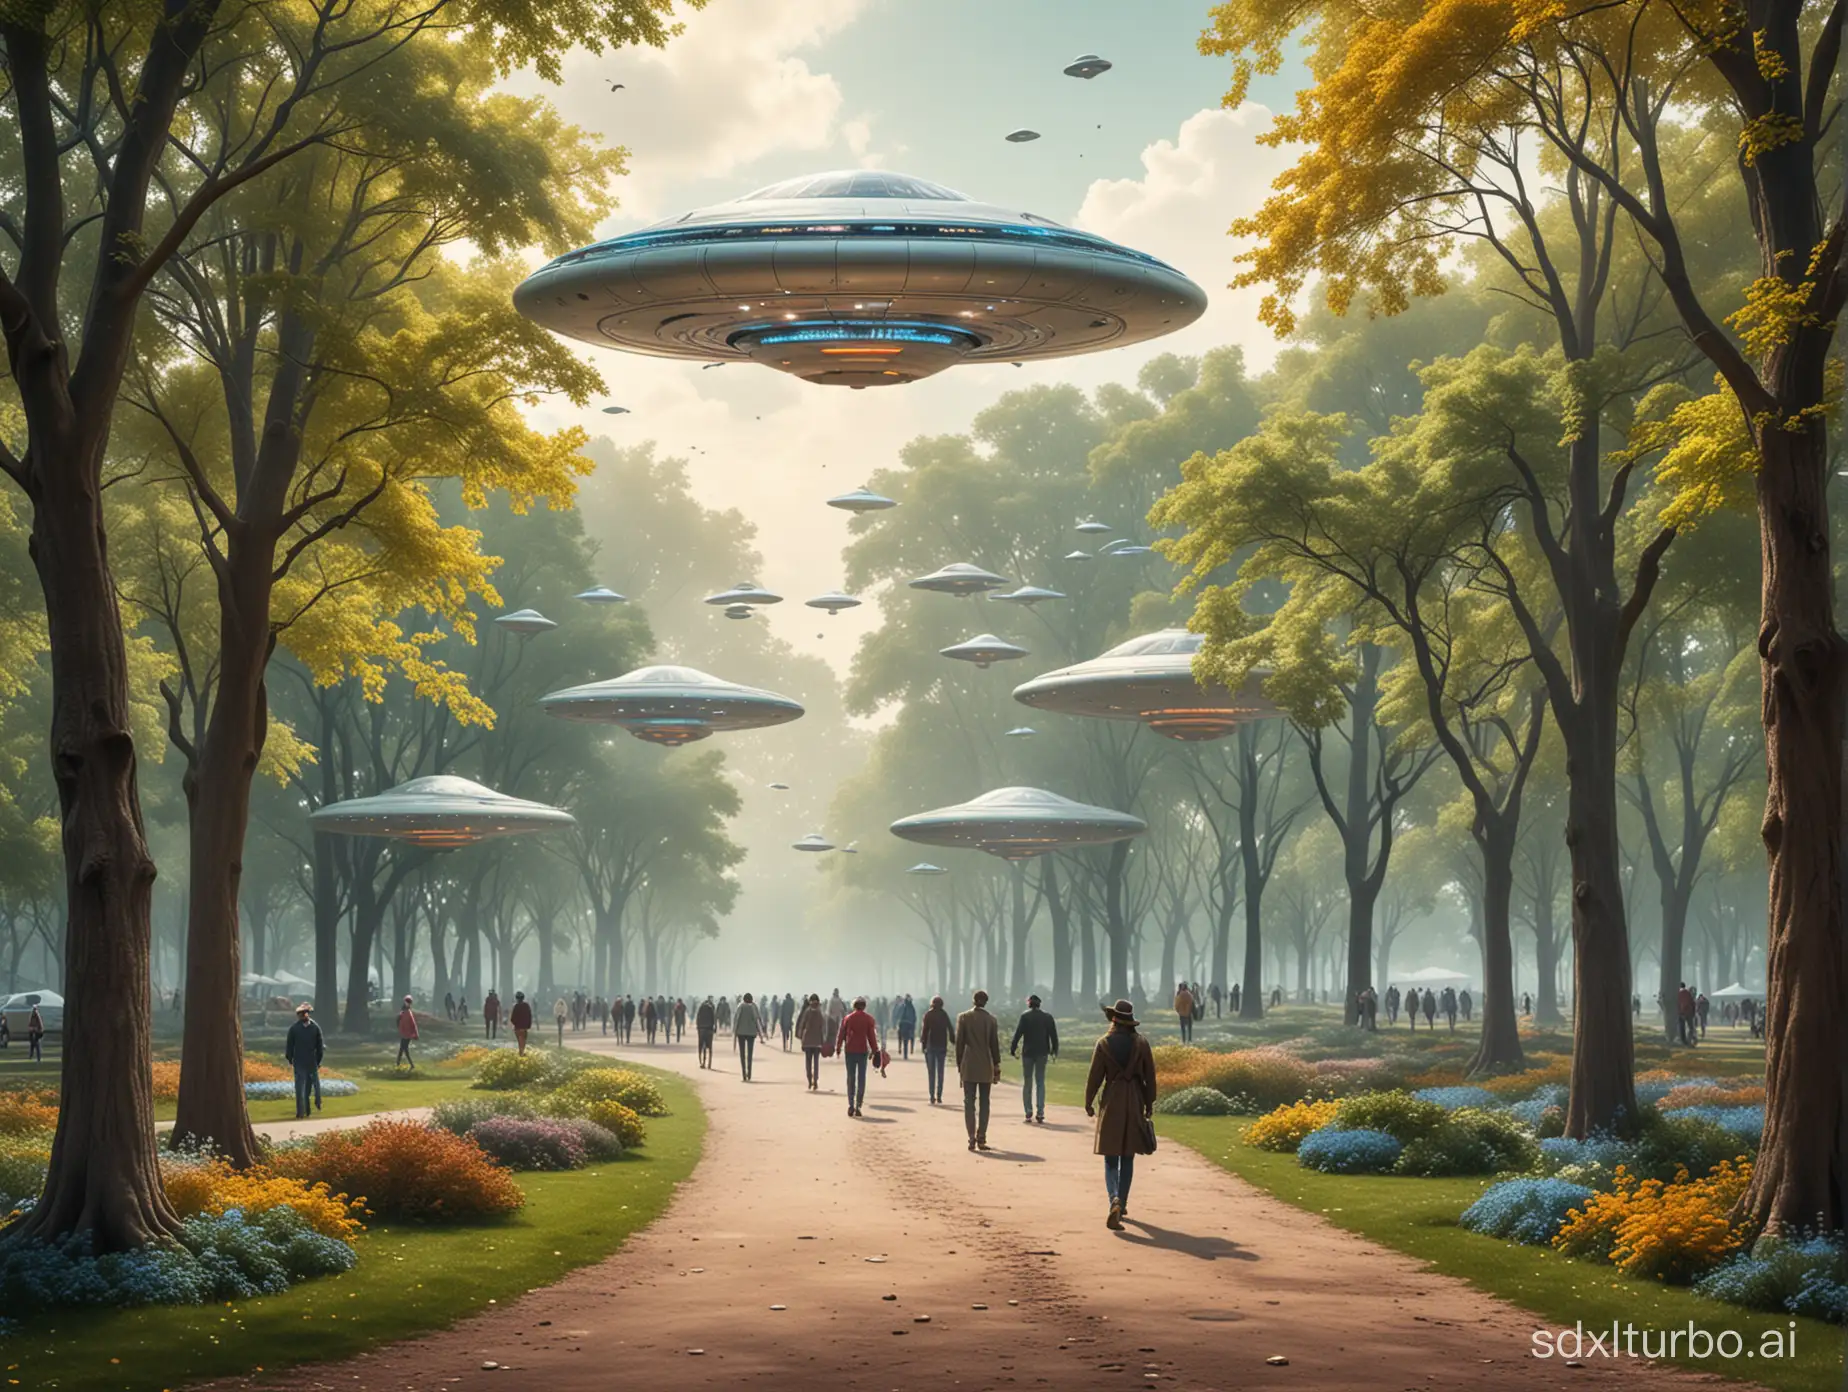 Futuristic-Park-Scene-with-Flying-Saucers-and-Strolling-Visitors